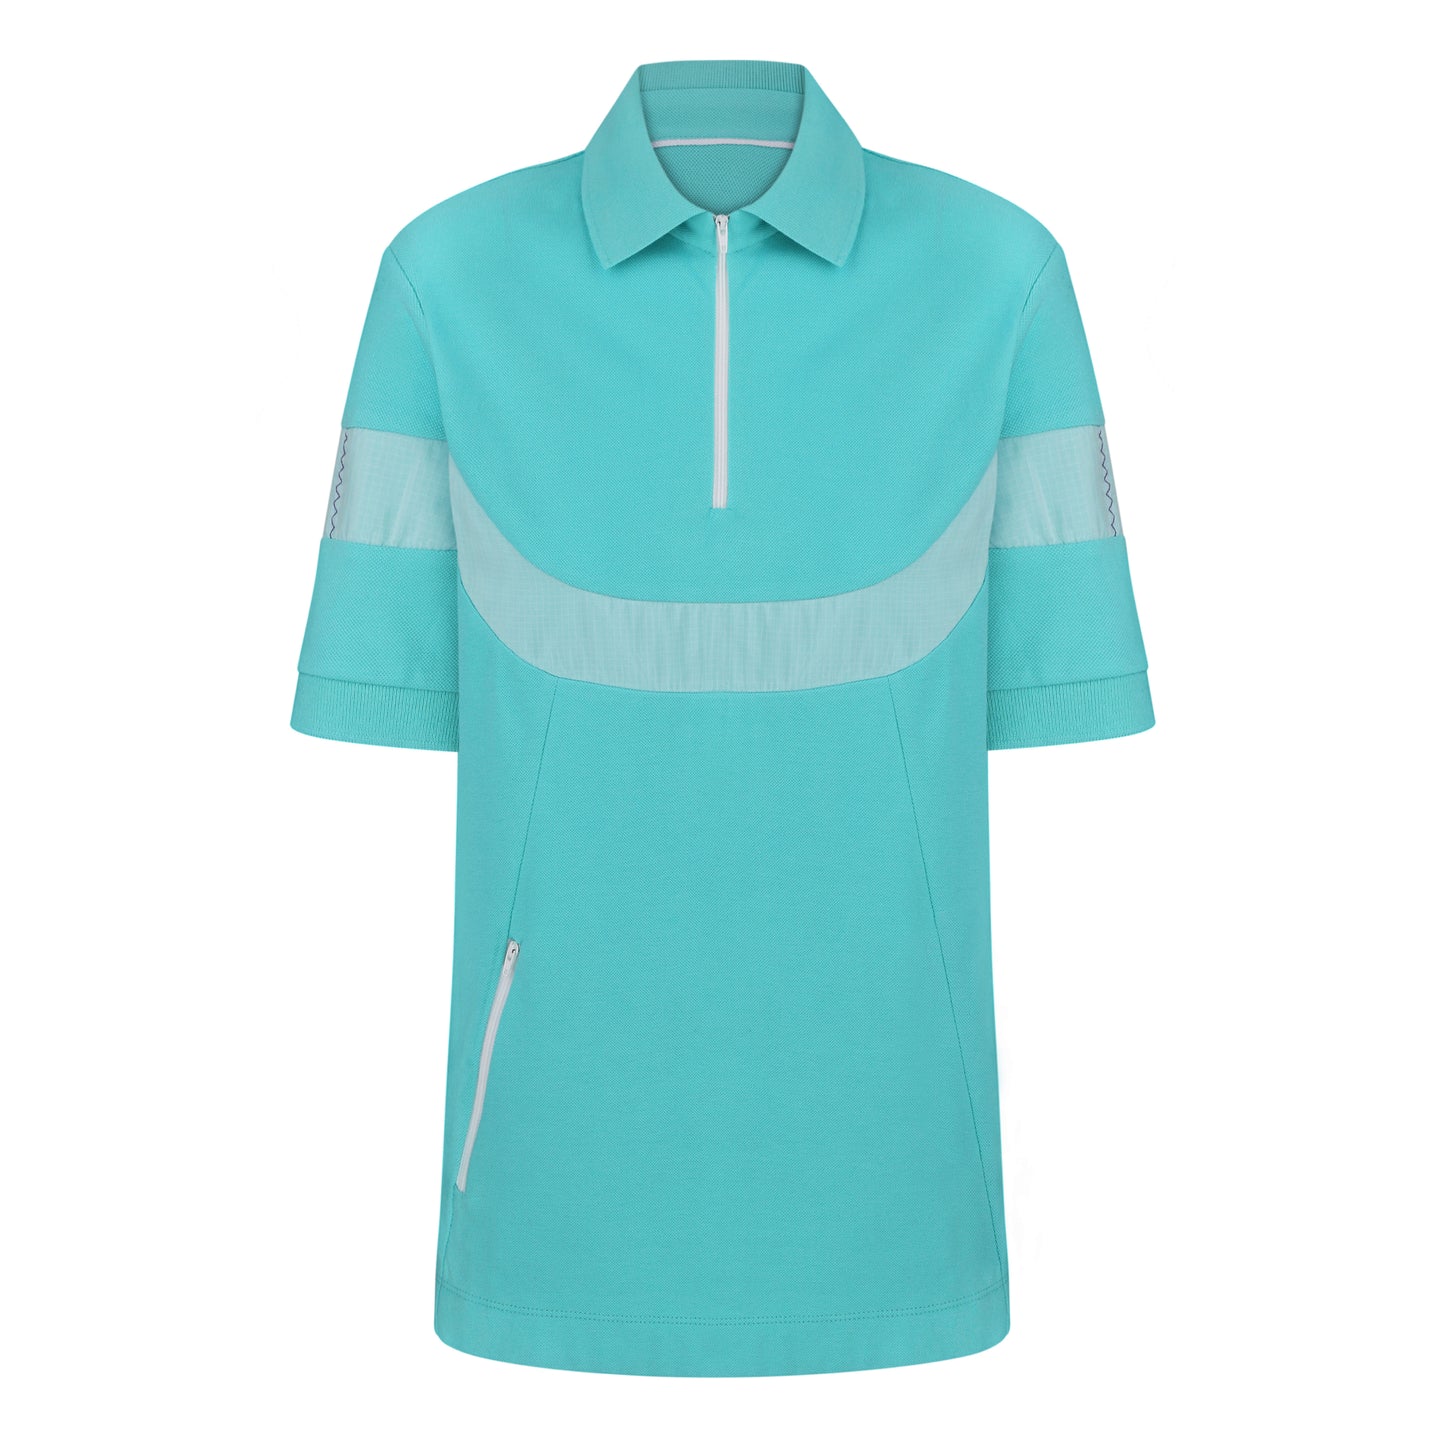 Green/Blue Polo with short sleeves & pockets. Made in Ukraine